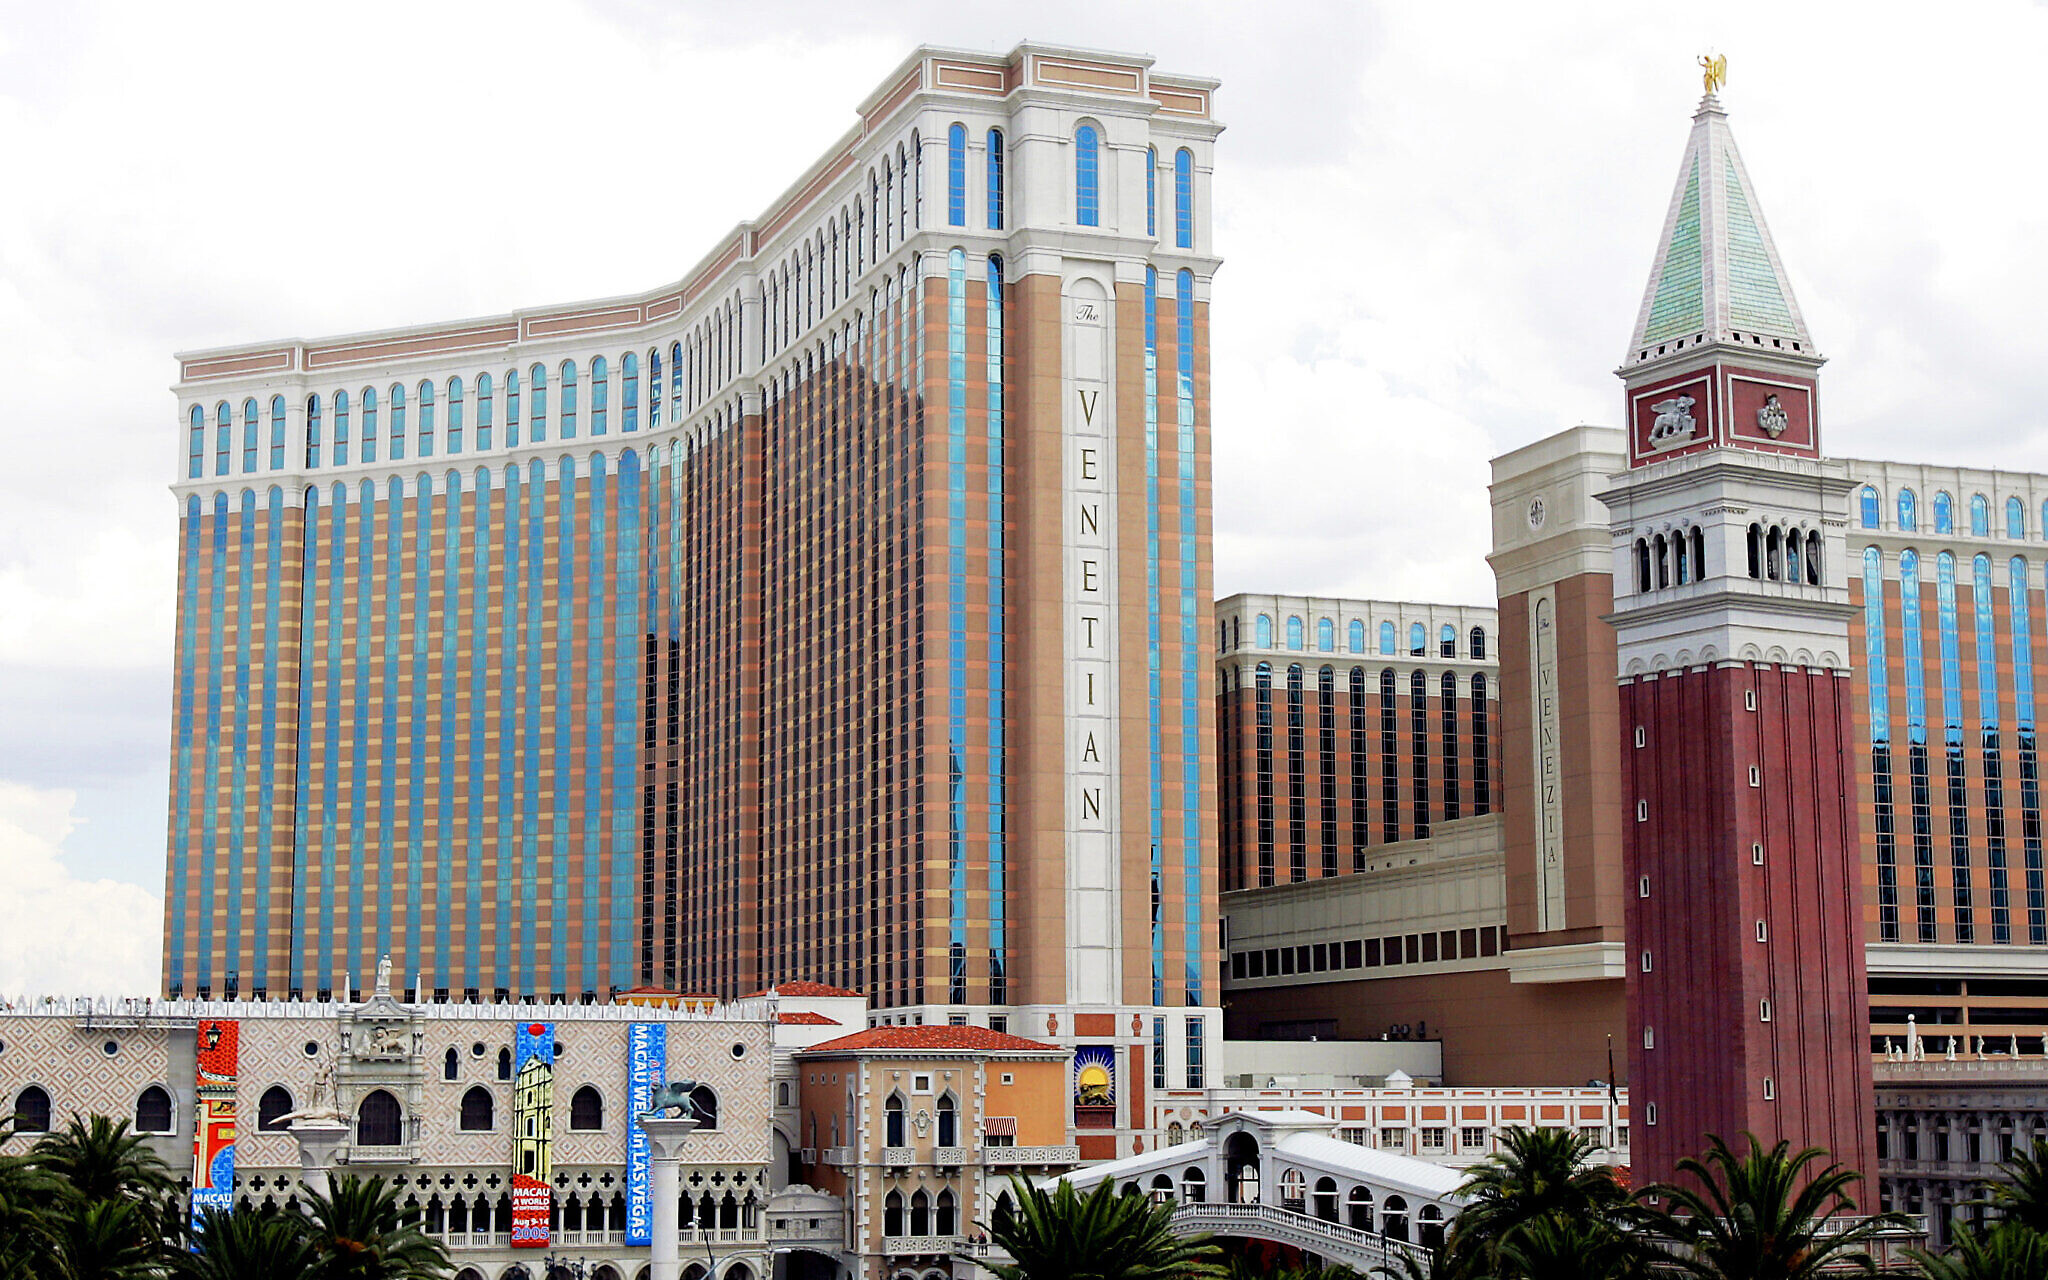 Adelson's Las Vegas Sands to sell exiting the Strip The